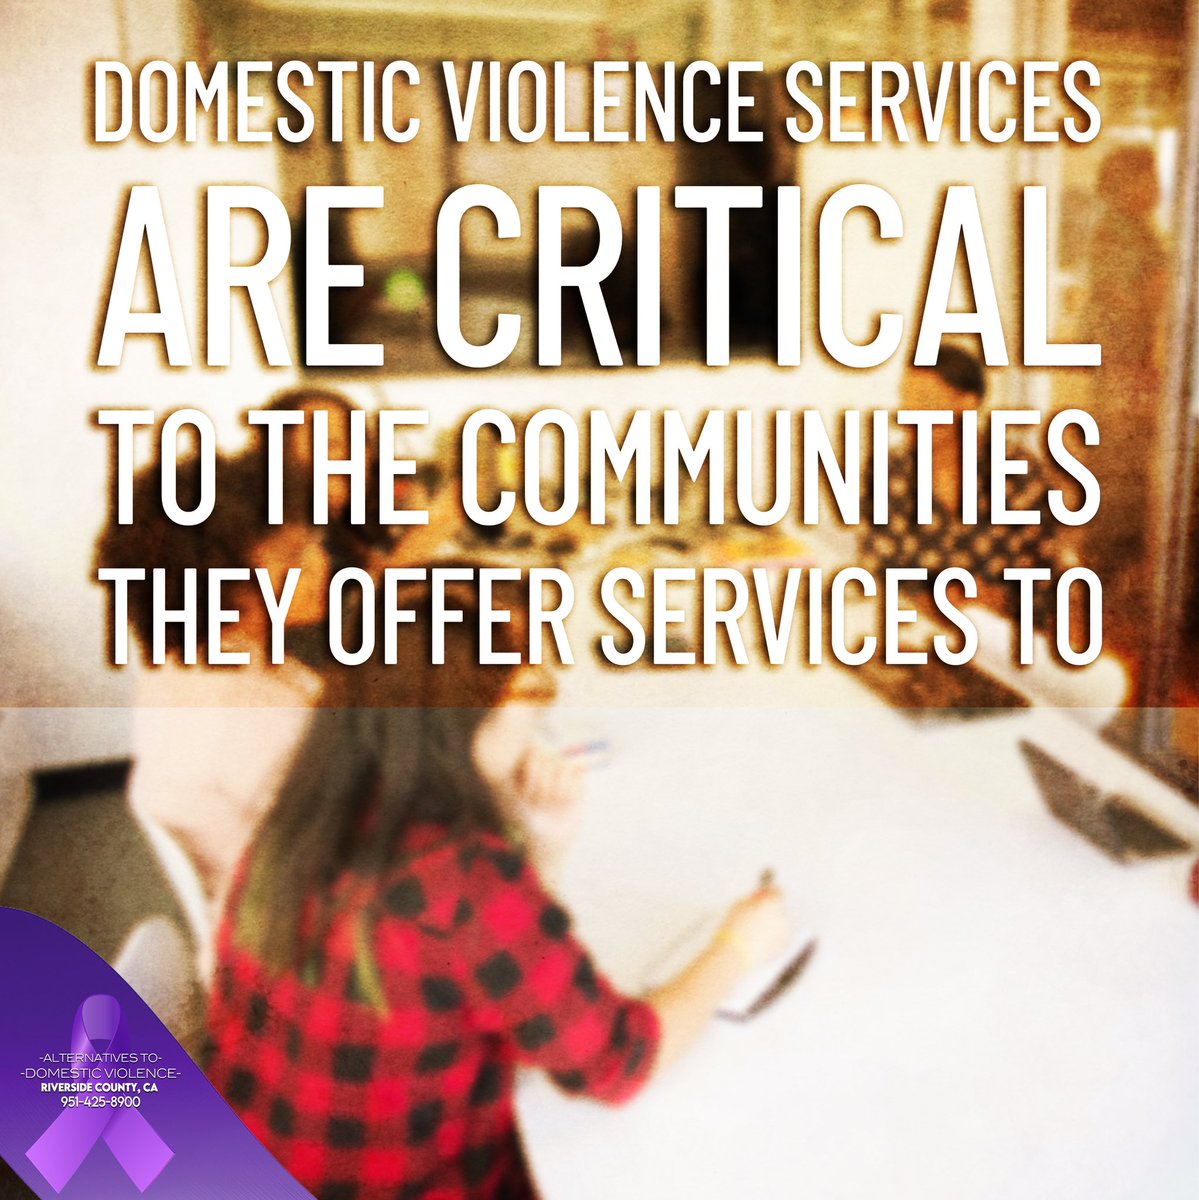 Freedom From Domestic Violence and Abuse is Within Reach. 
Call ADV!
1-800-339-7233
alternativestodomesticviolence.org

#domesticabuse #domesticviolence 
#Riversidecalifornia #riversidecounty